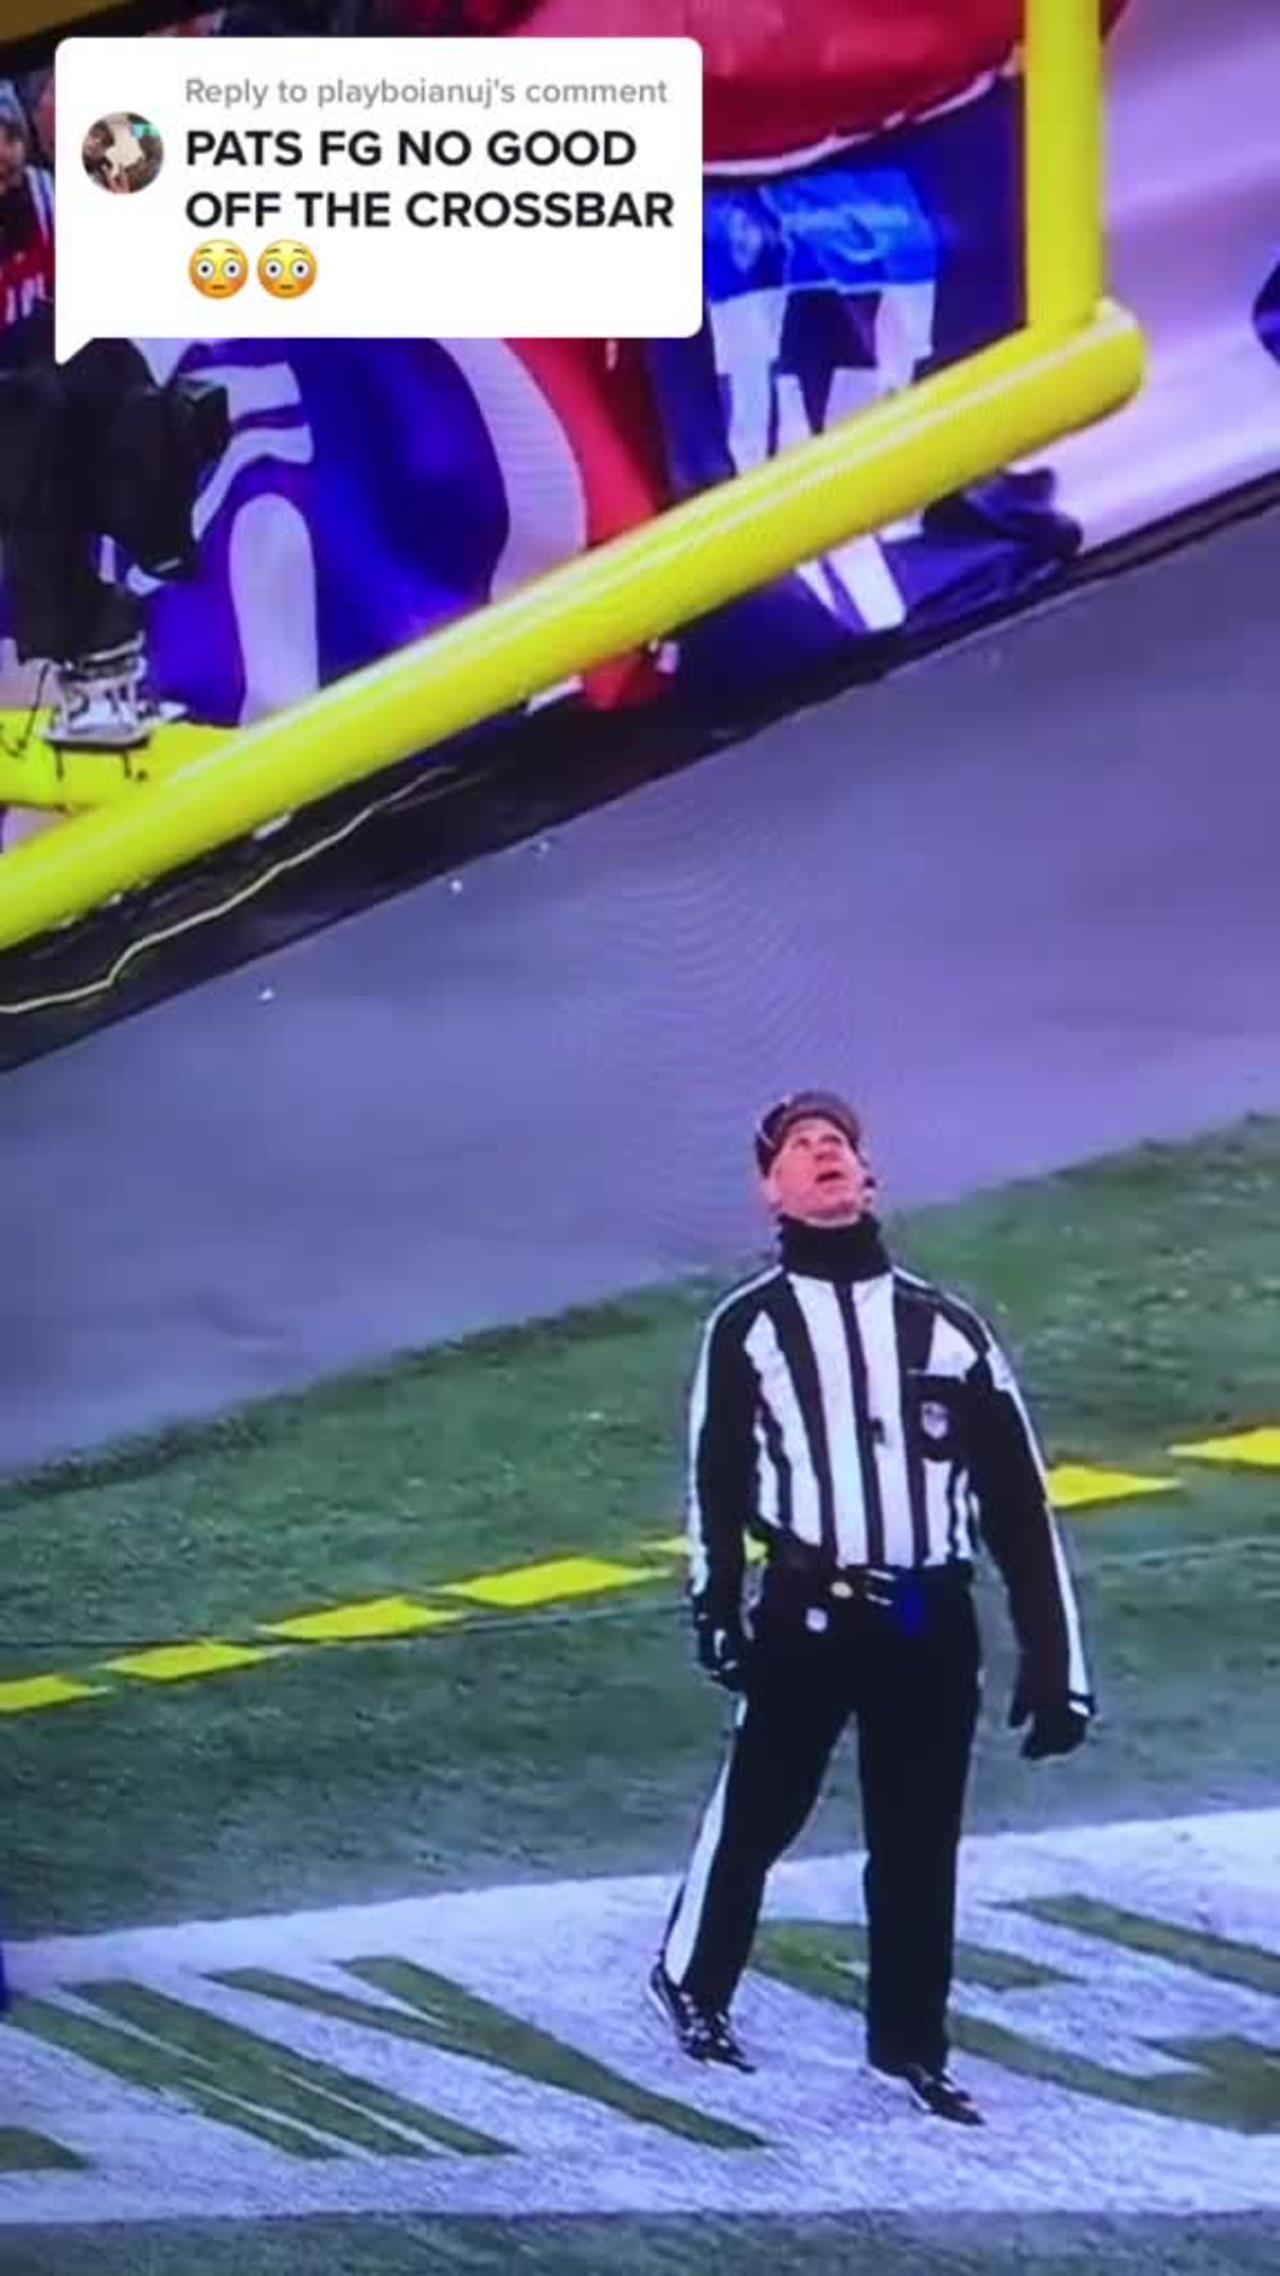 Put on your ear muffs before watching Bill Belichick‘s reaction to this field goal